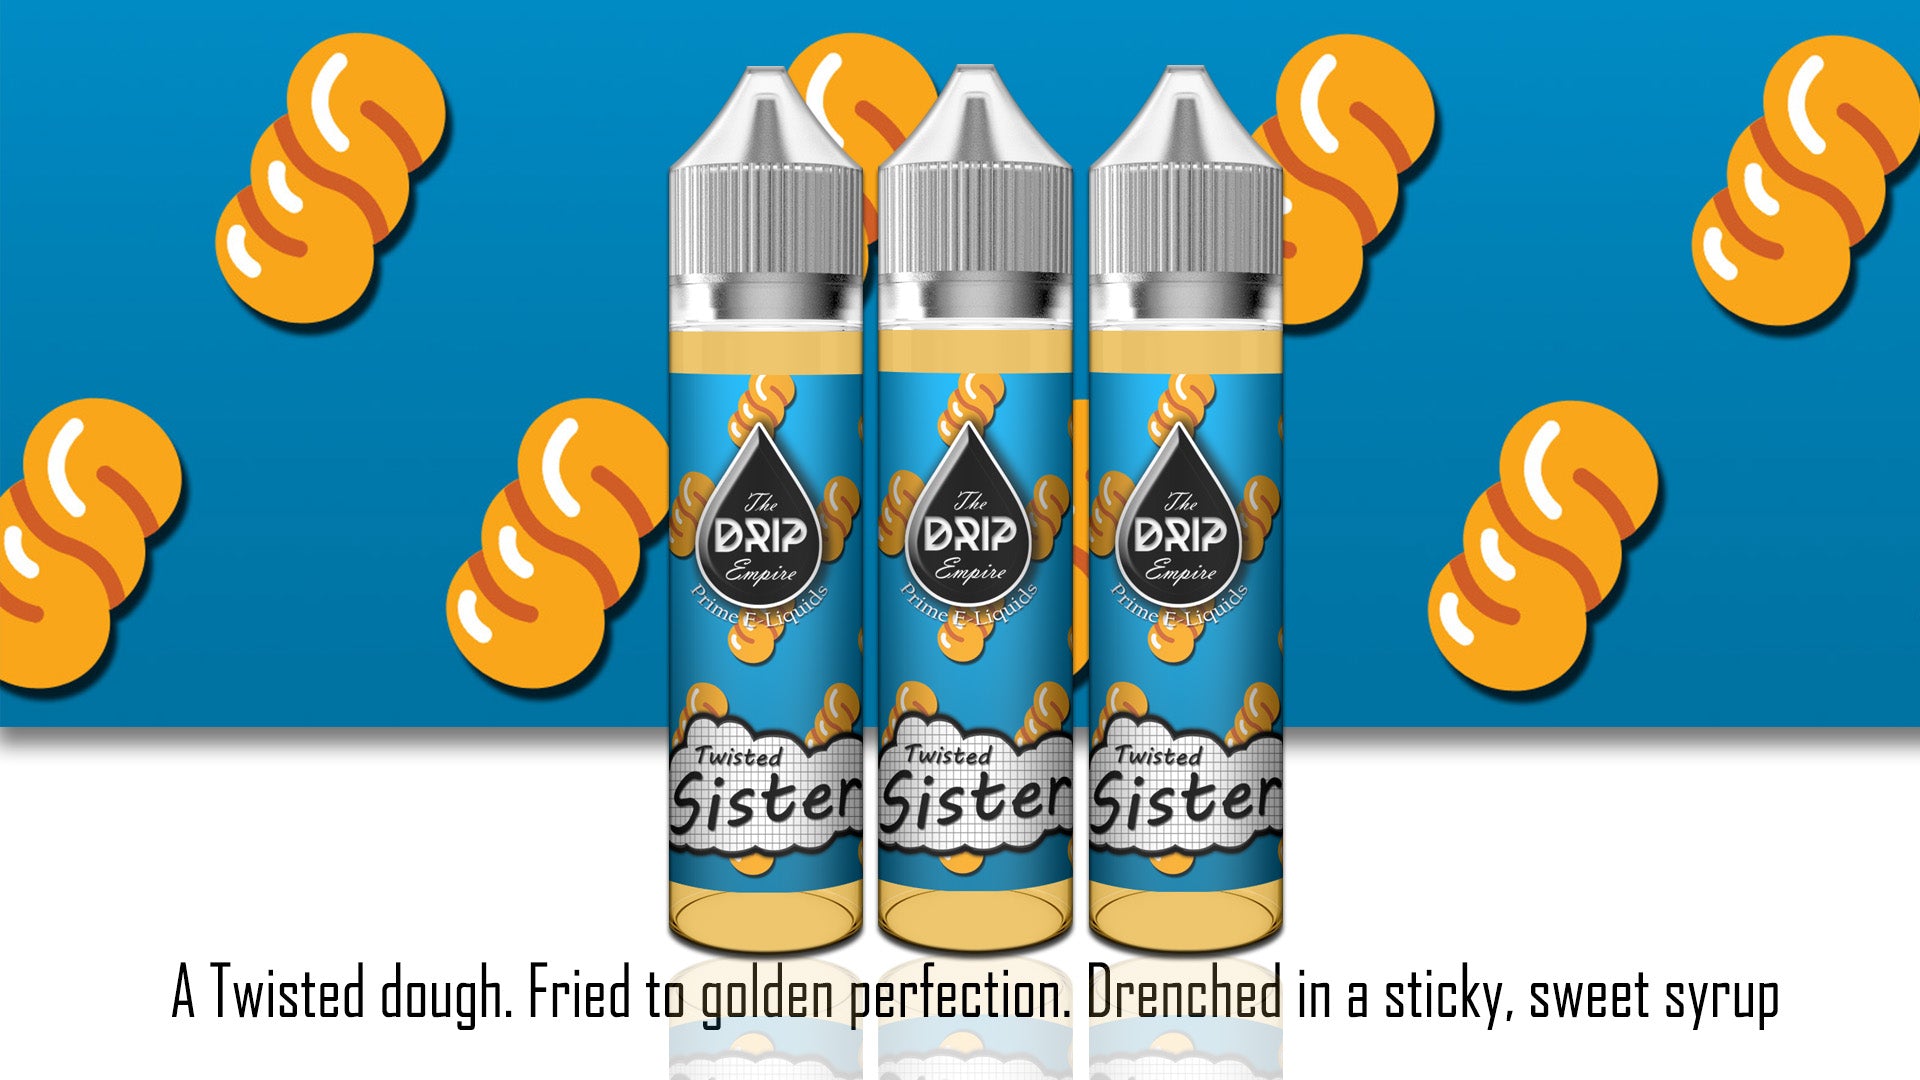 Twisted Sister by The Drip Empire 60ml | Vape Junction